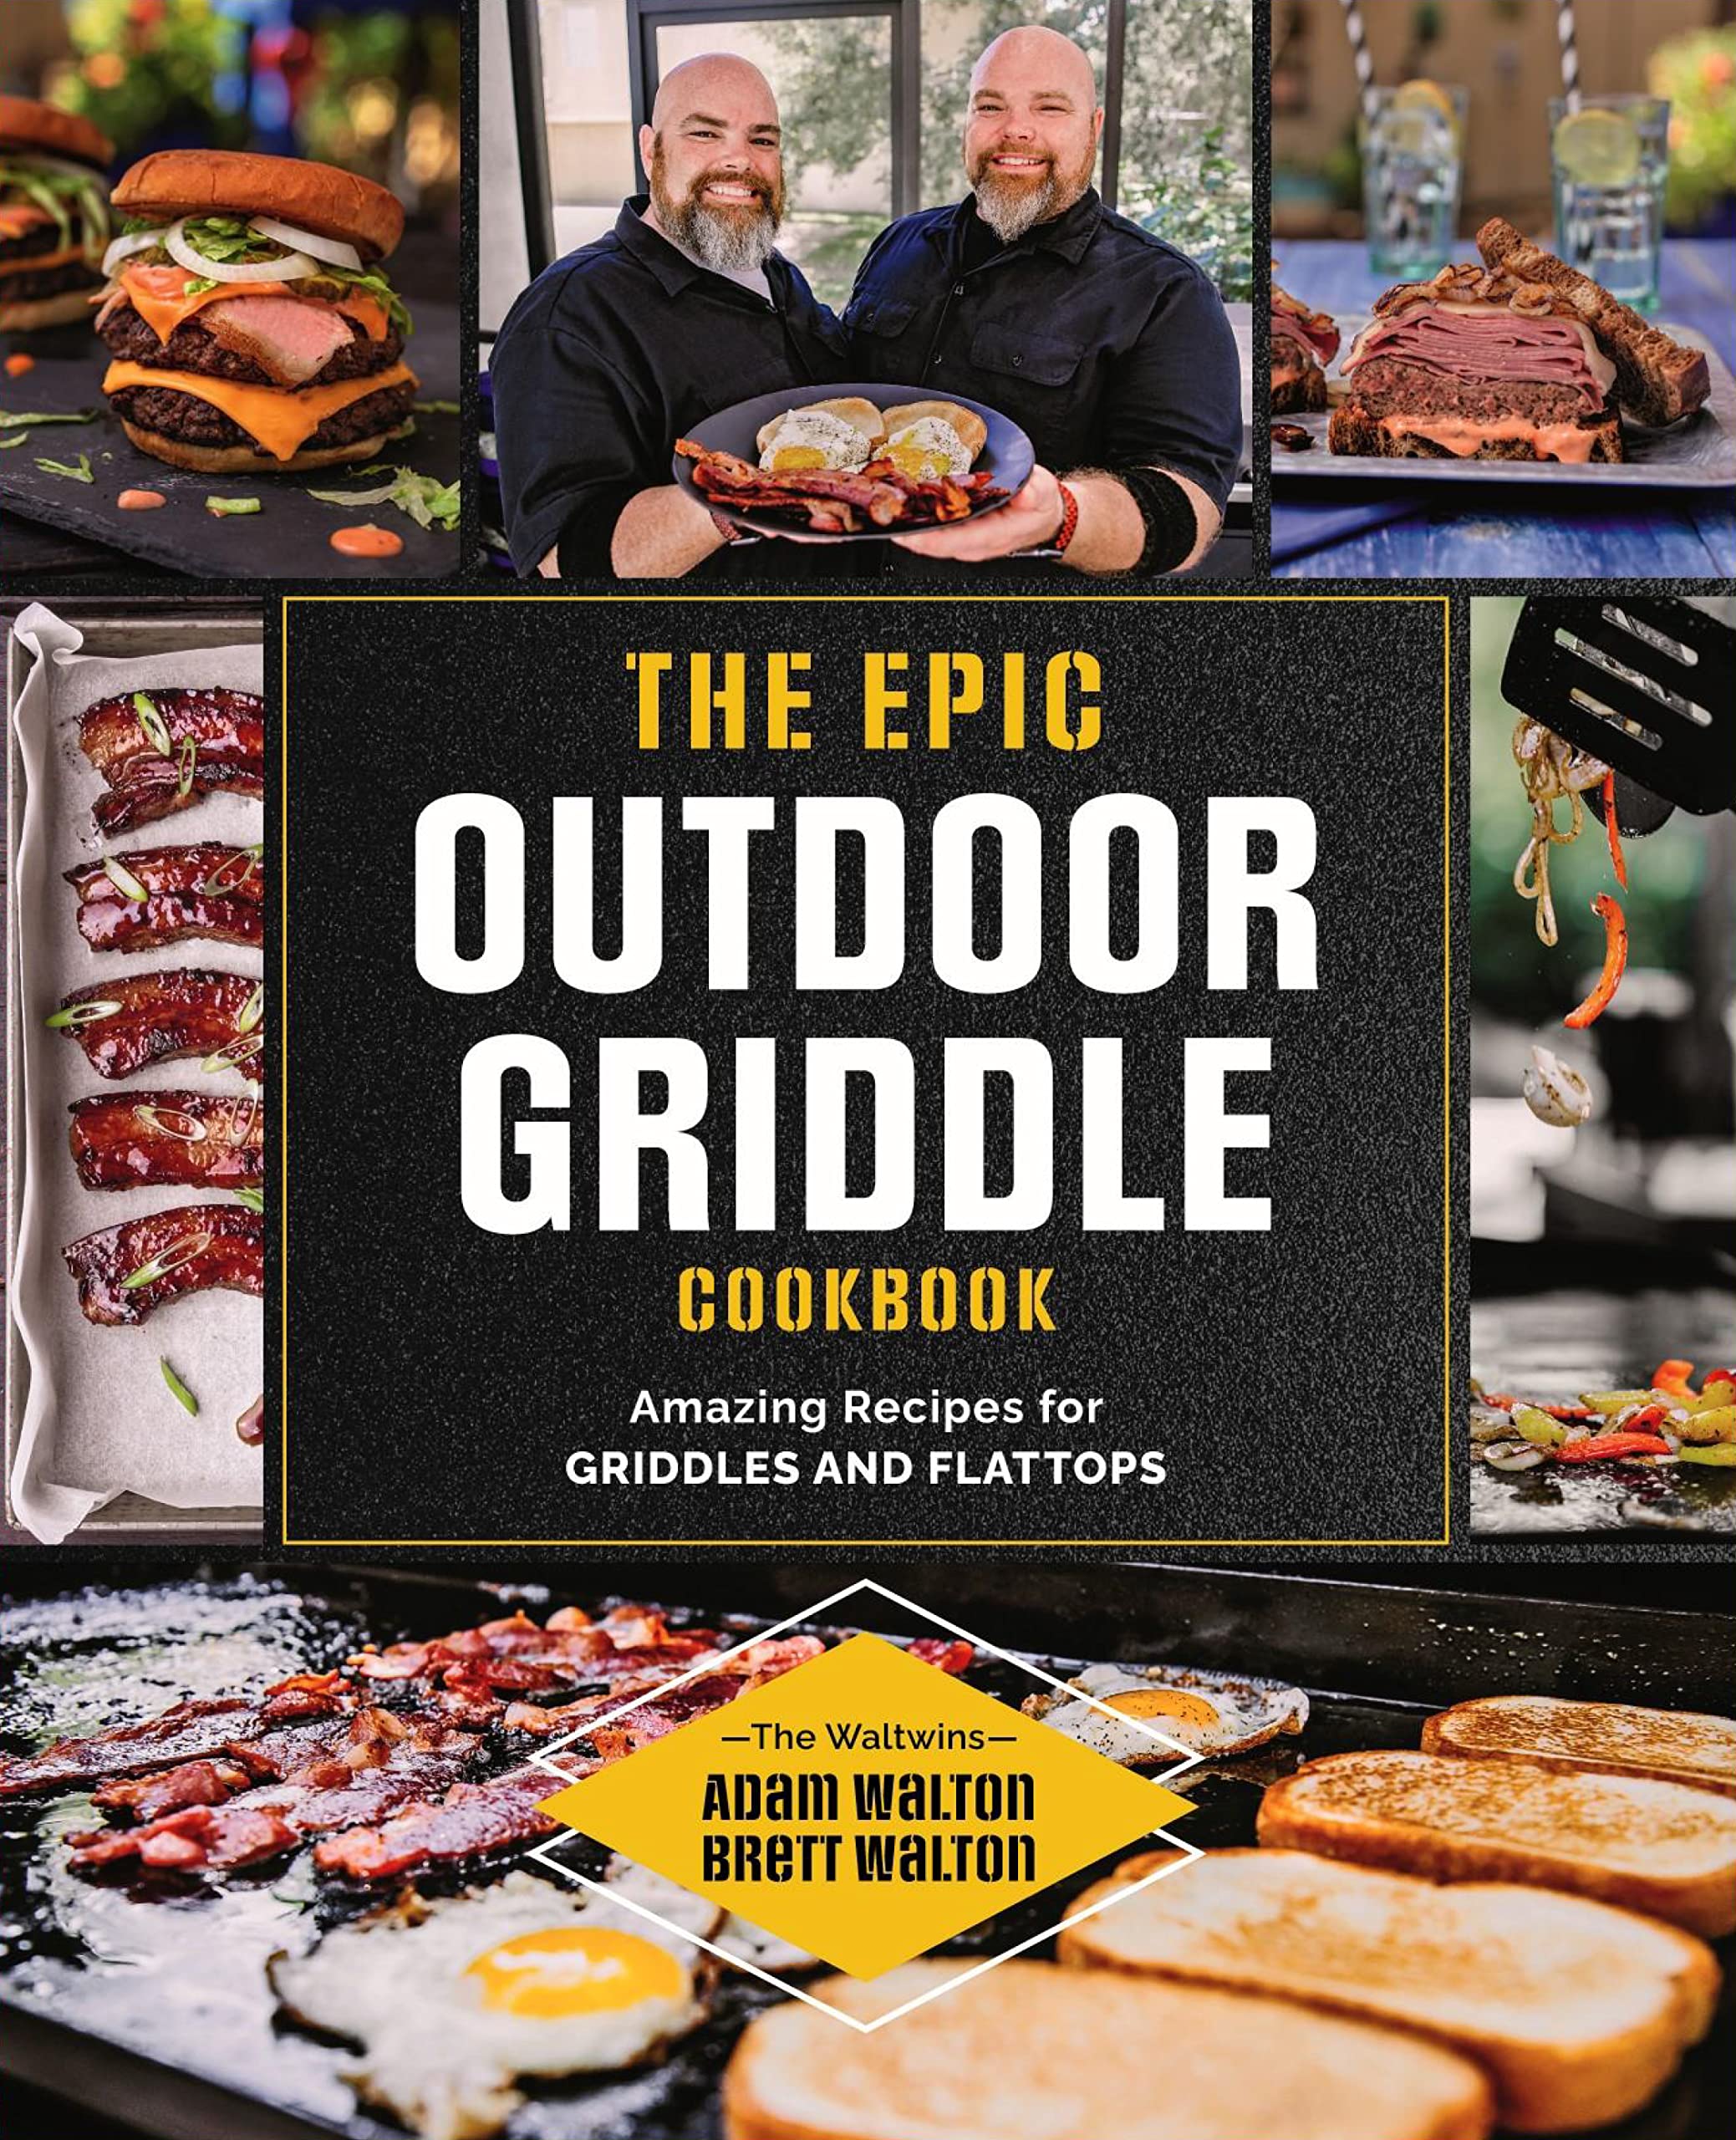 The Epic Outdoor Griddle Cookbook: Amazing Recipes for Griddles and Flattops by Walton, Adam